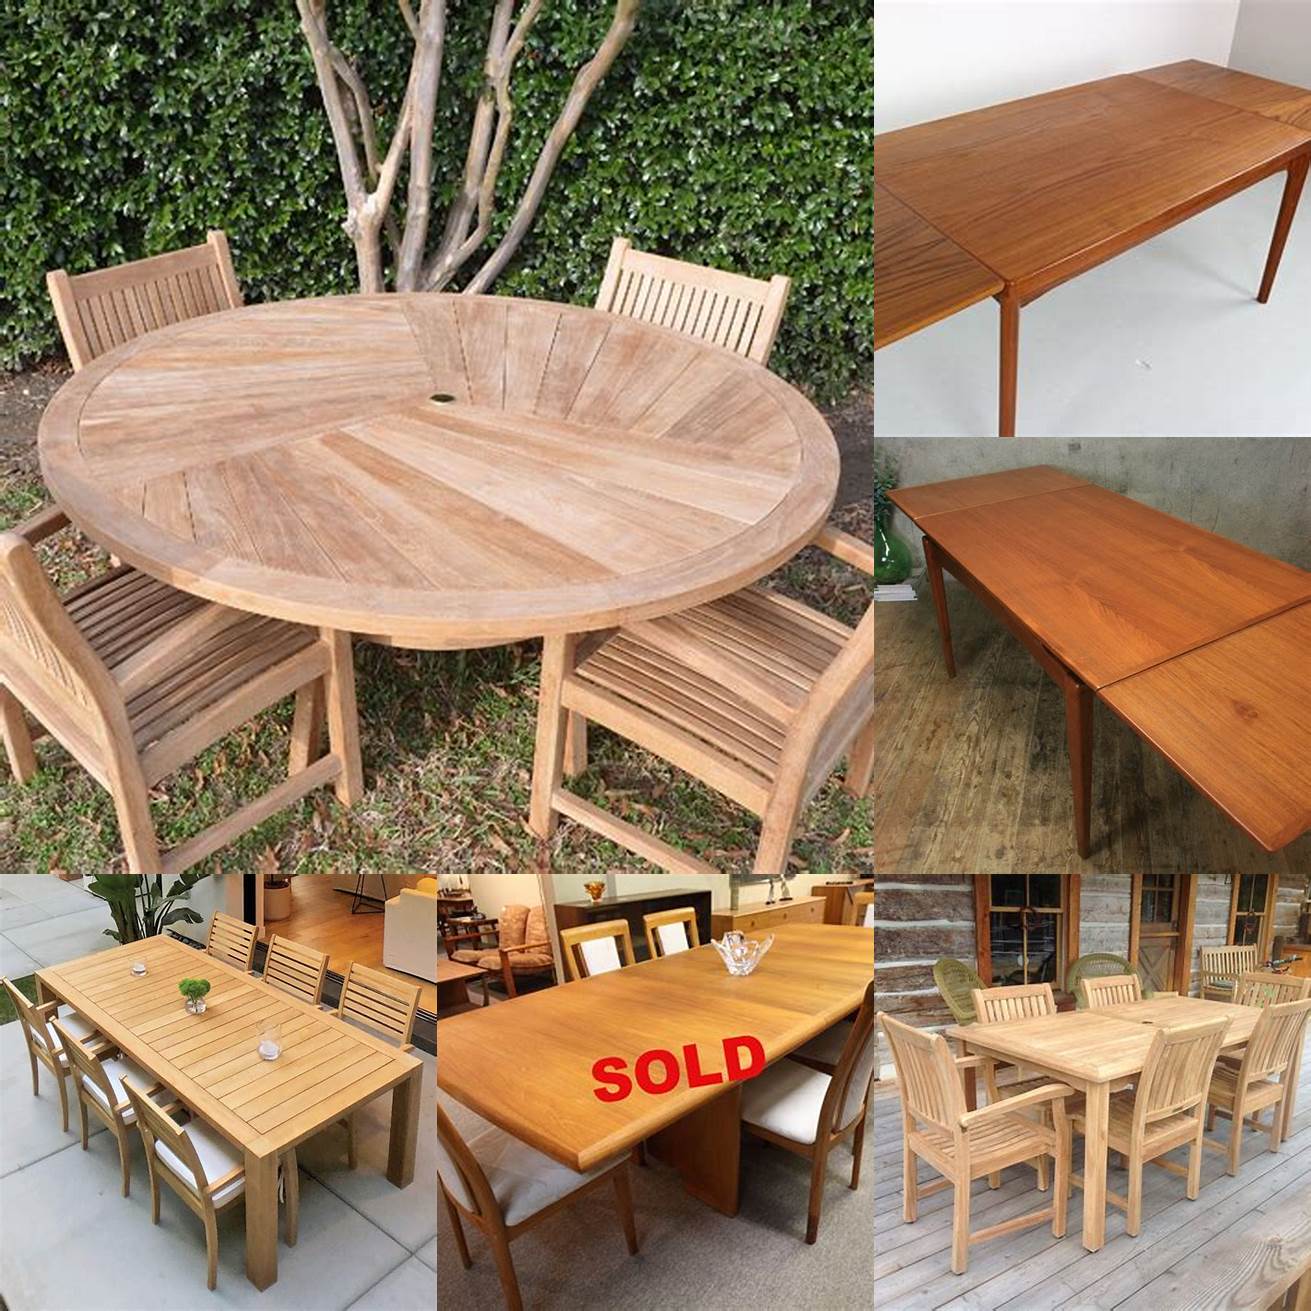 A picture of a teak dining table